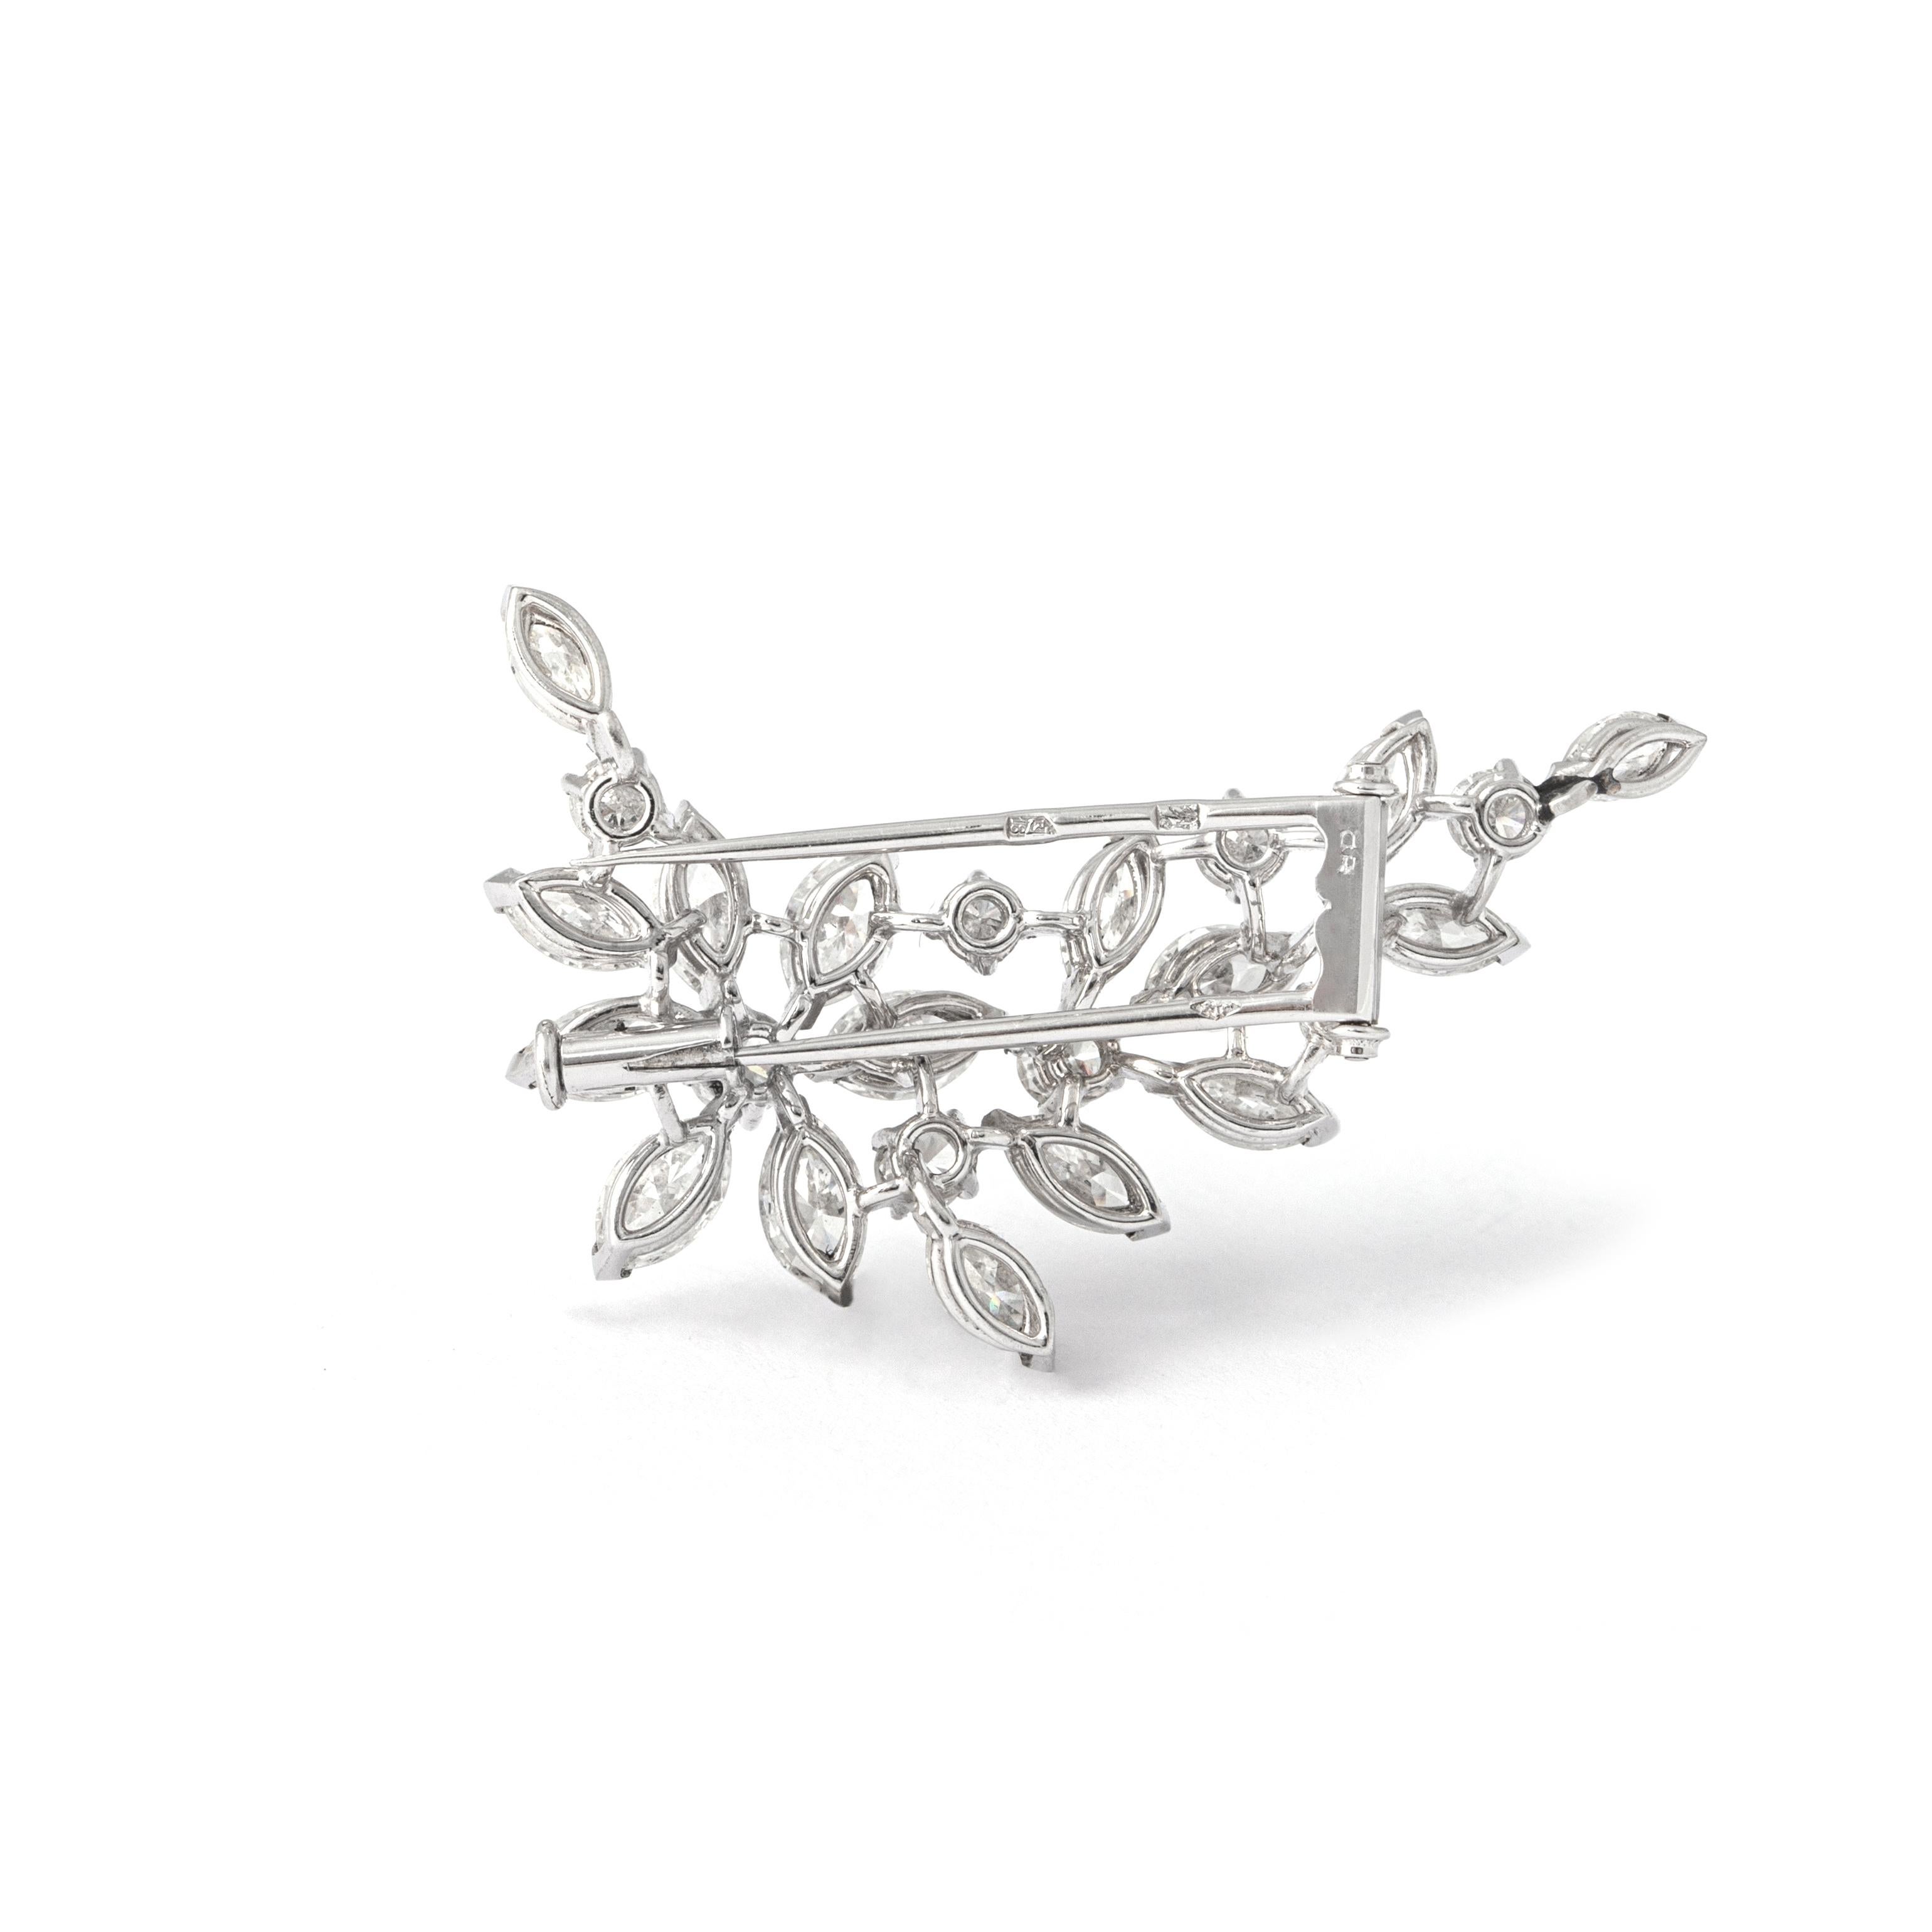 Indulge in the timeless allure of our Diamond 18K White Gold Brooch—a masterpiece of sophistication and brilliance.

This exquisite brooch boasts a harmonious blend of diamonds, with 8 round-cut diamonds weighing approximately 0.95 carats in total,